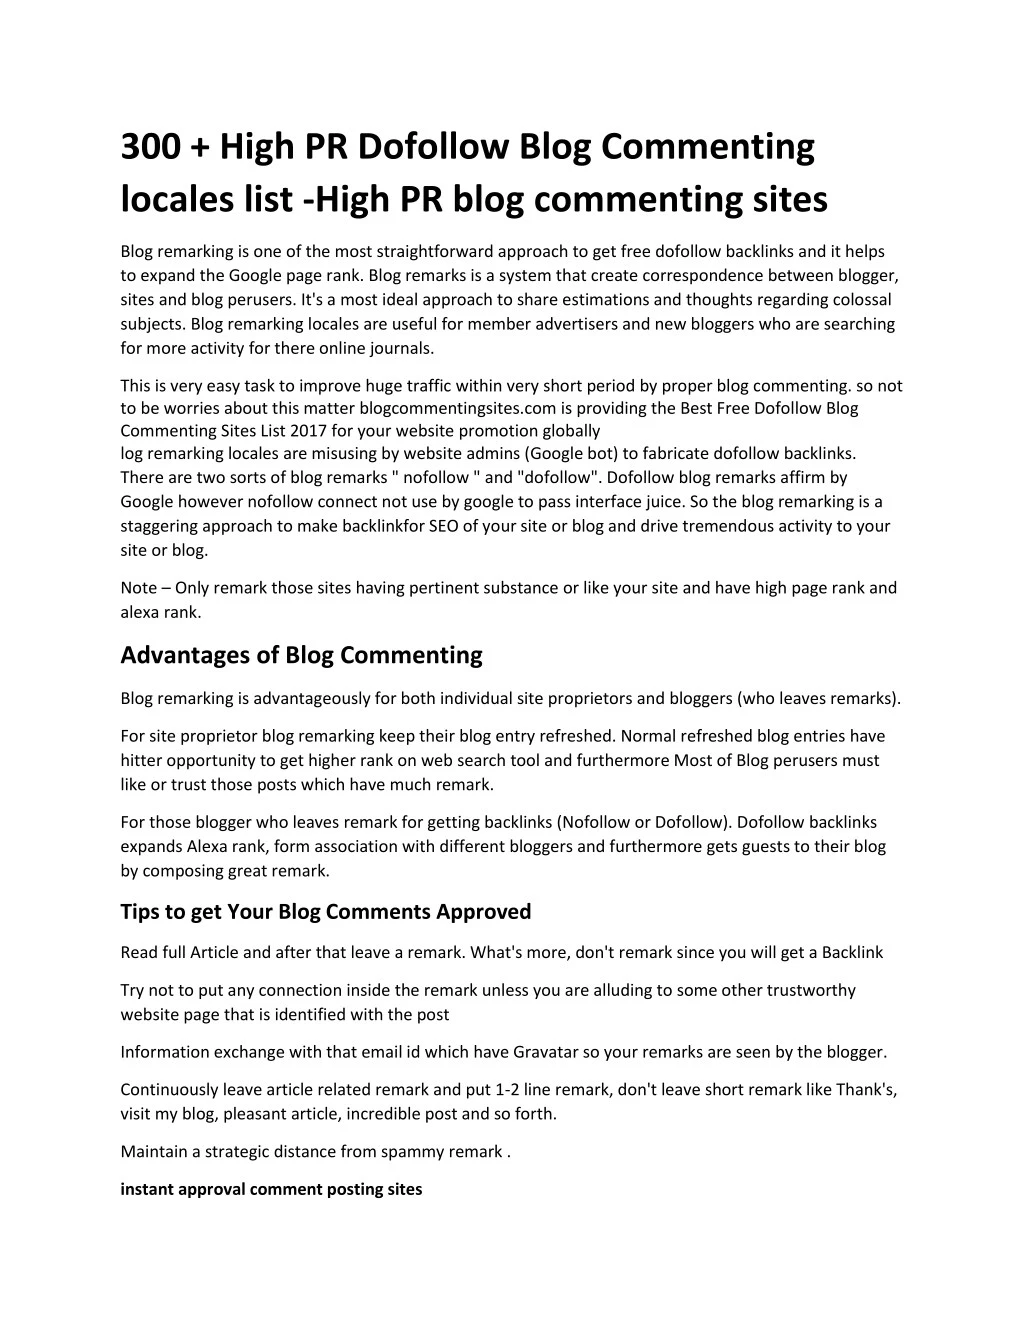 300 high pr dofollow blog commenting locales list